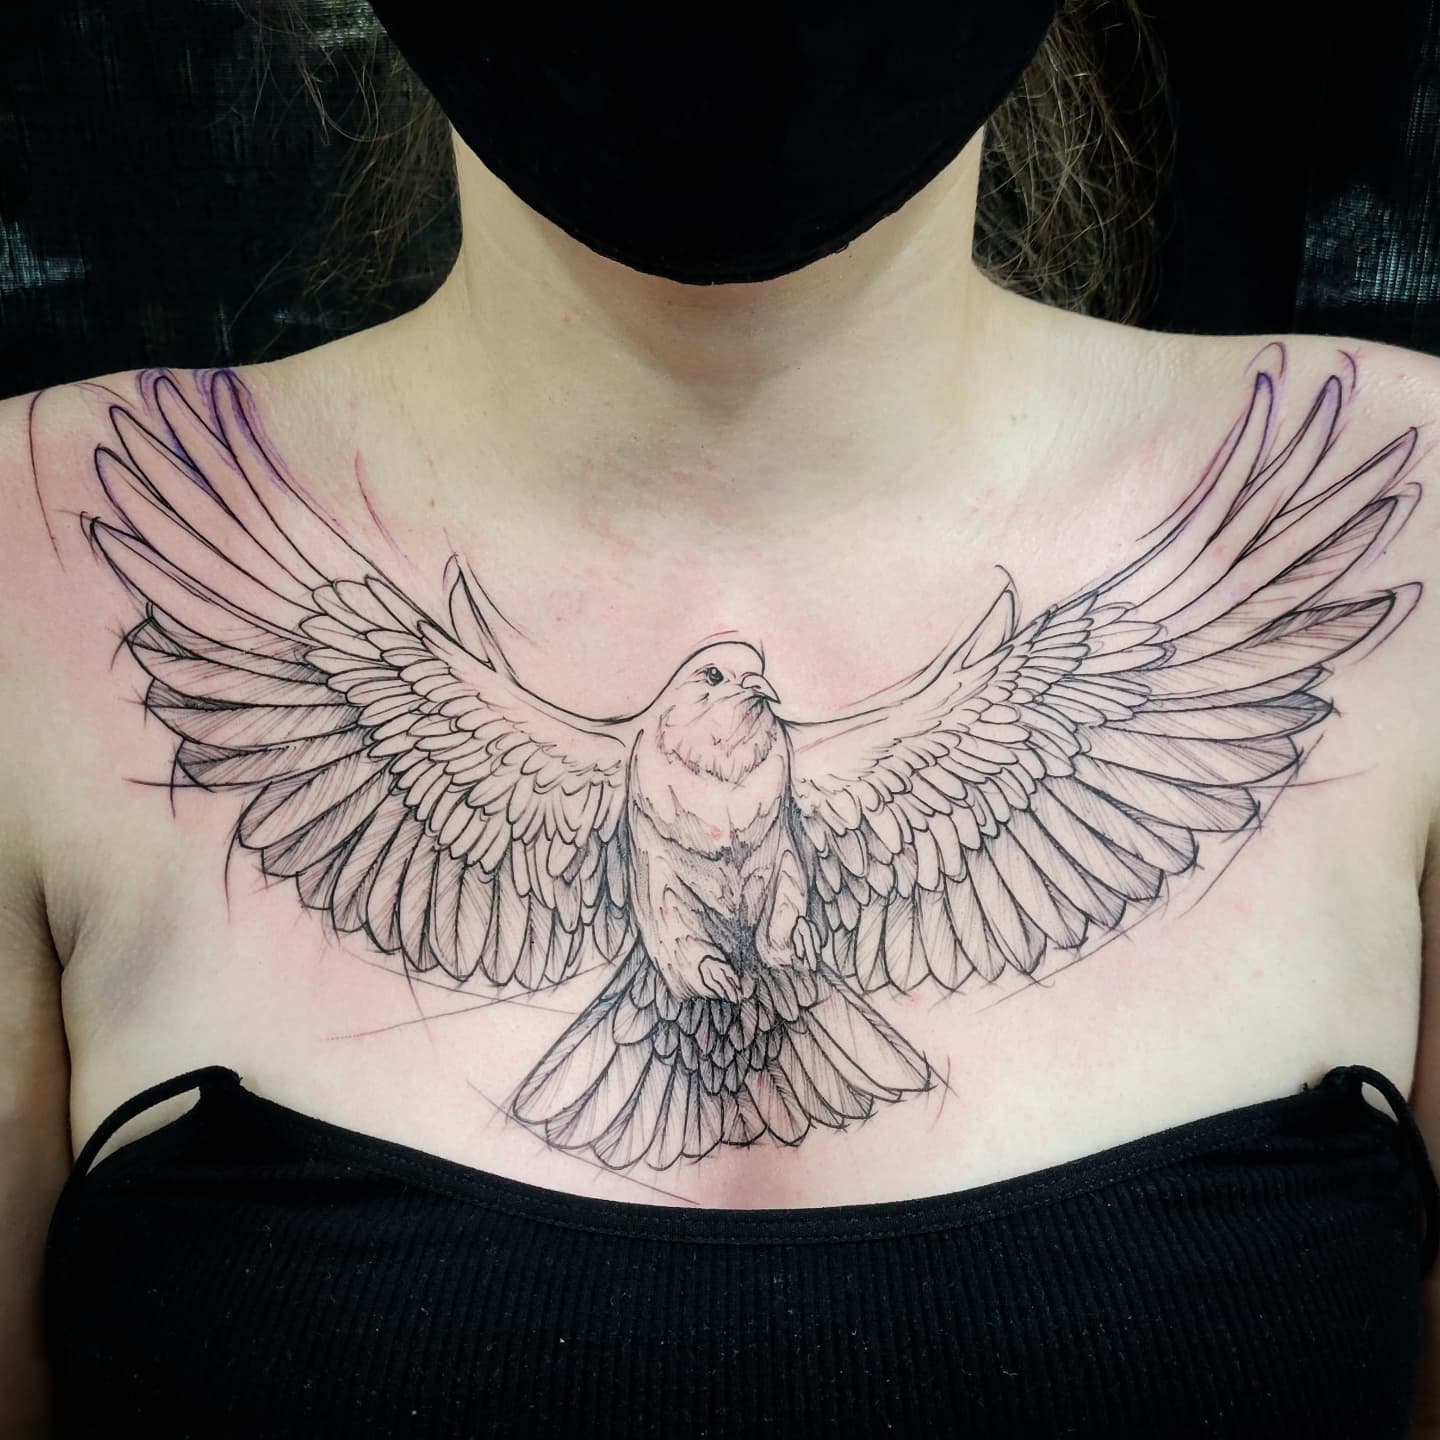 30+ Dove Tattoo Ideas: Small, Large, Meanings and Ideas - 100 Tattoos